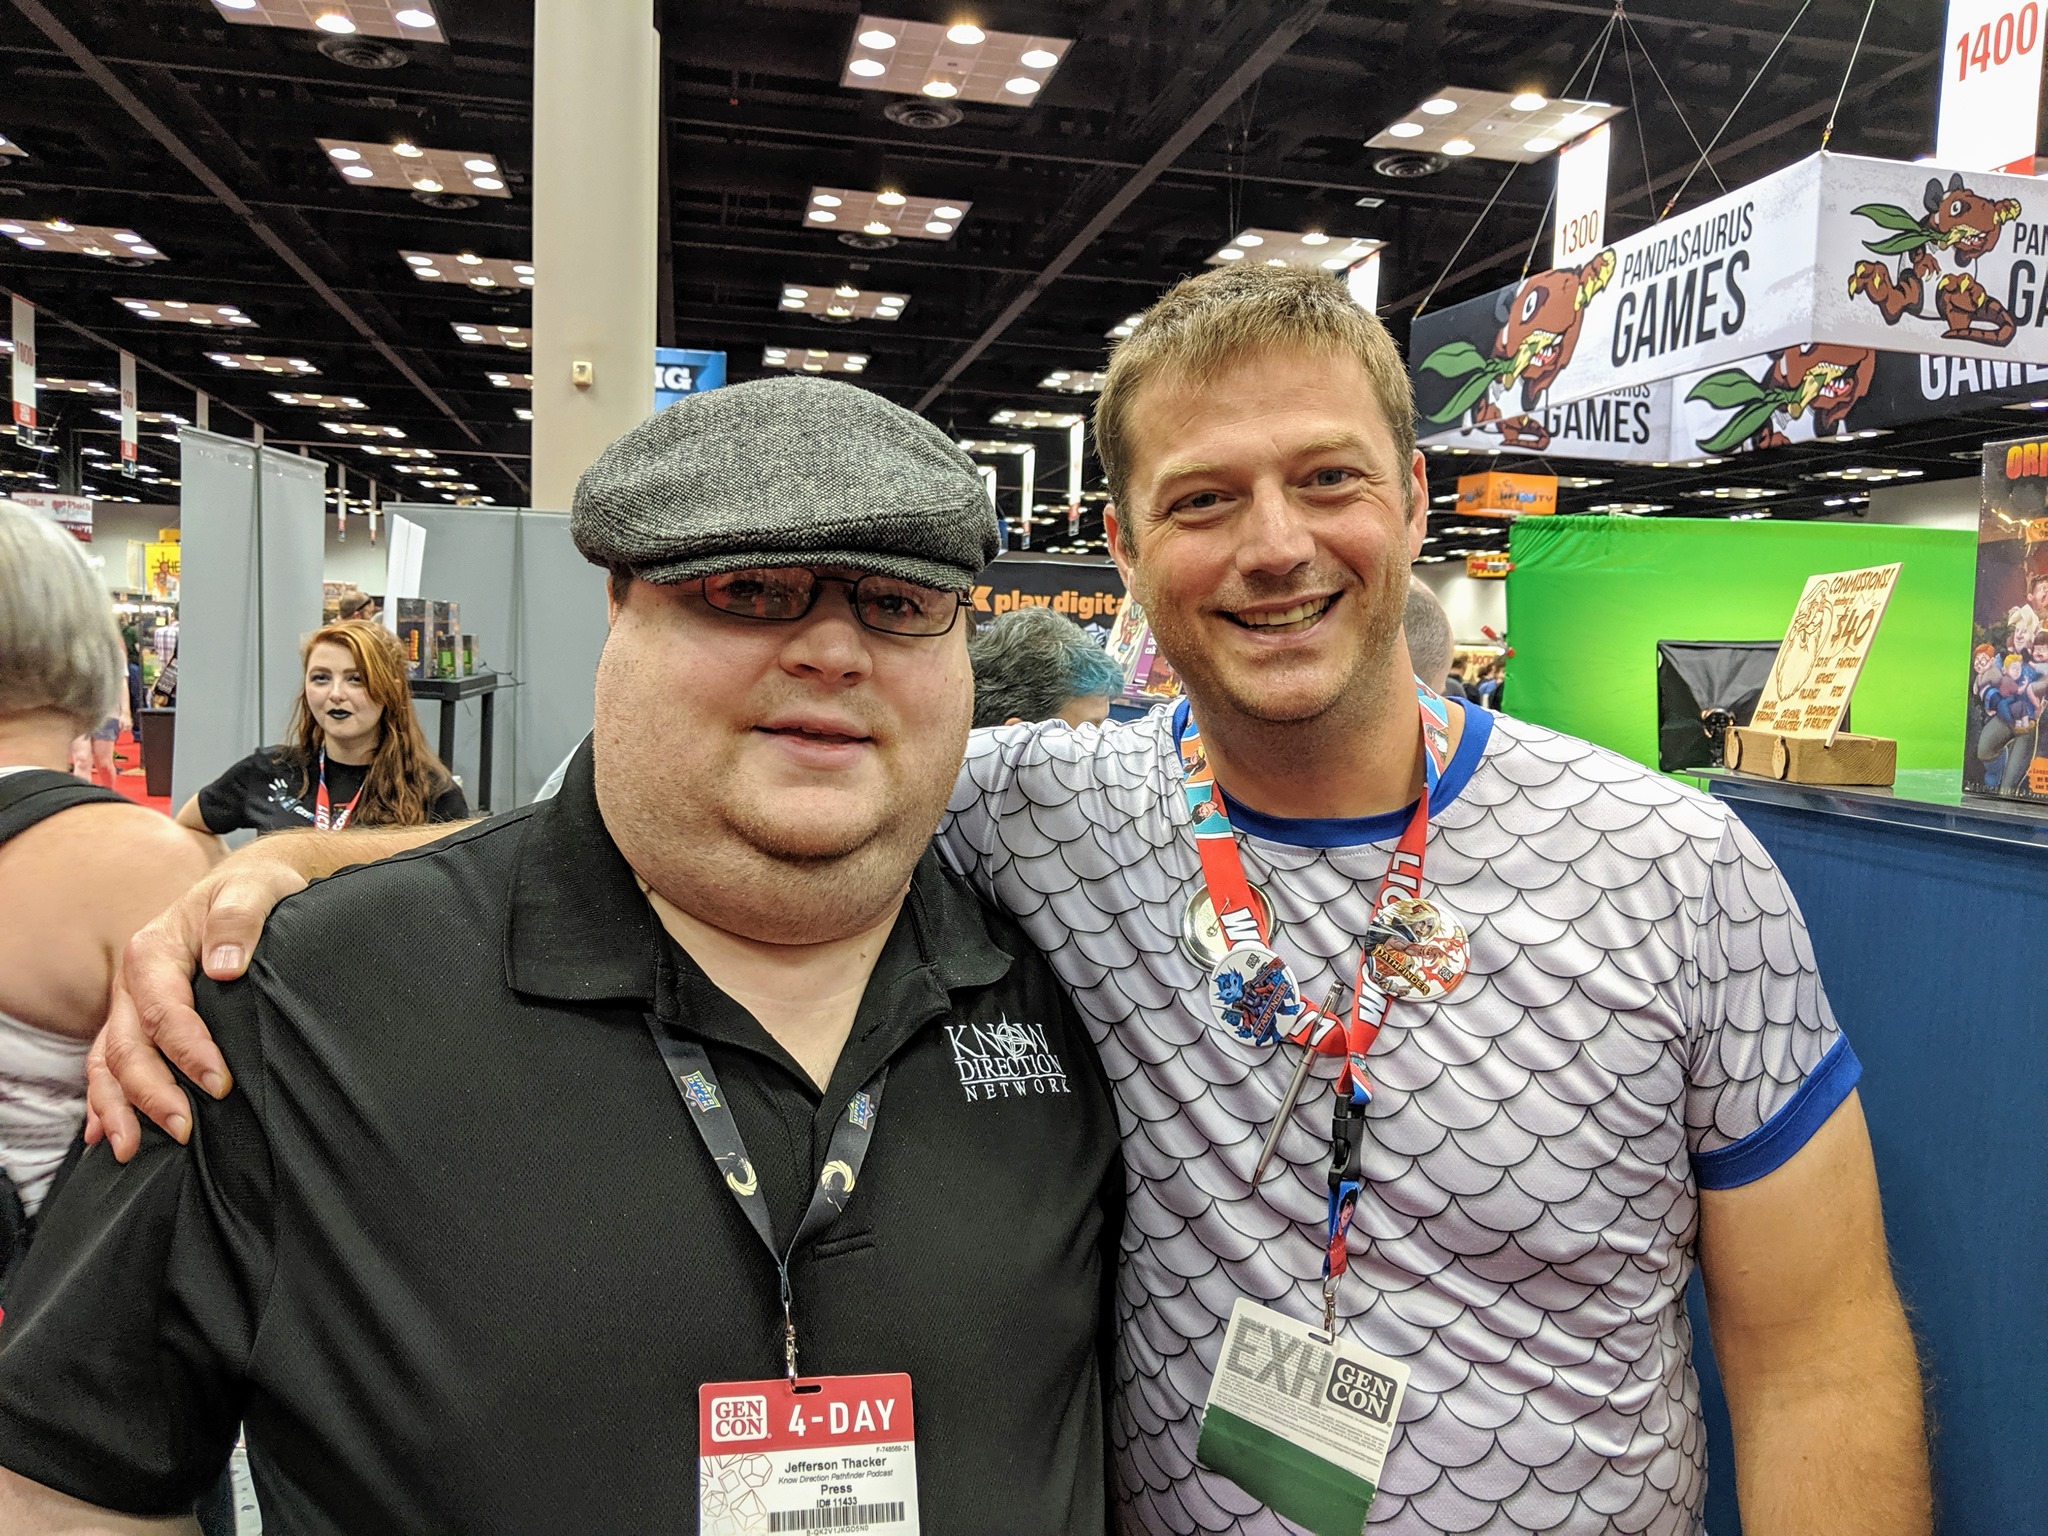 Ryan and Perram together at Gen Con